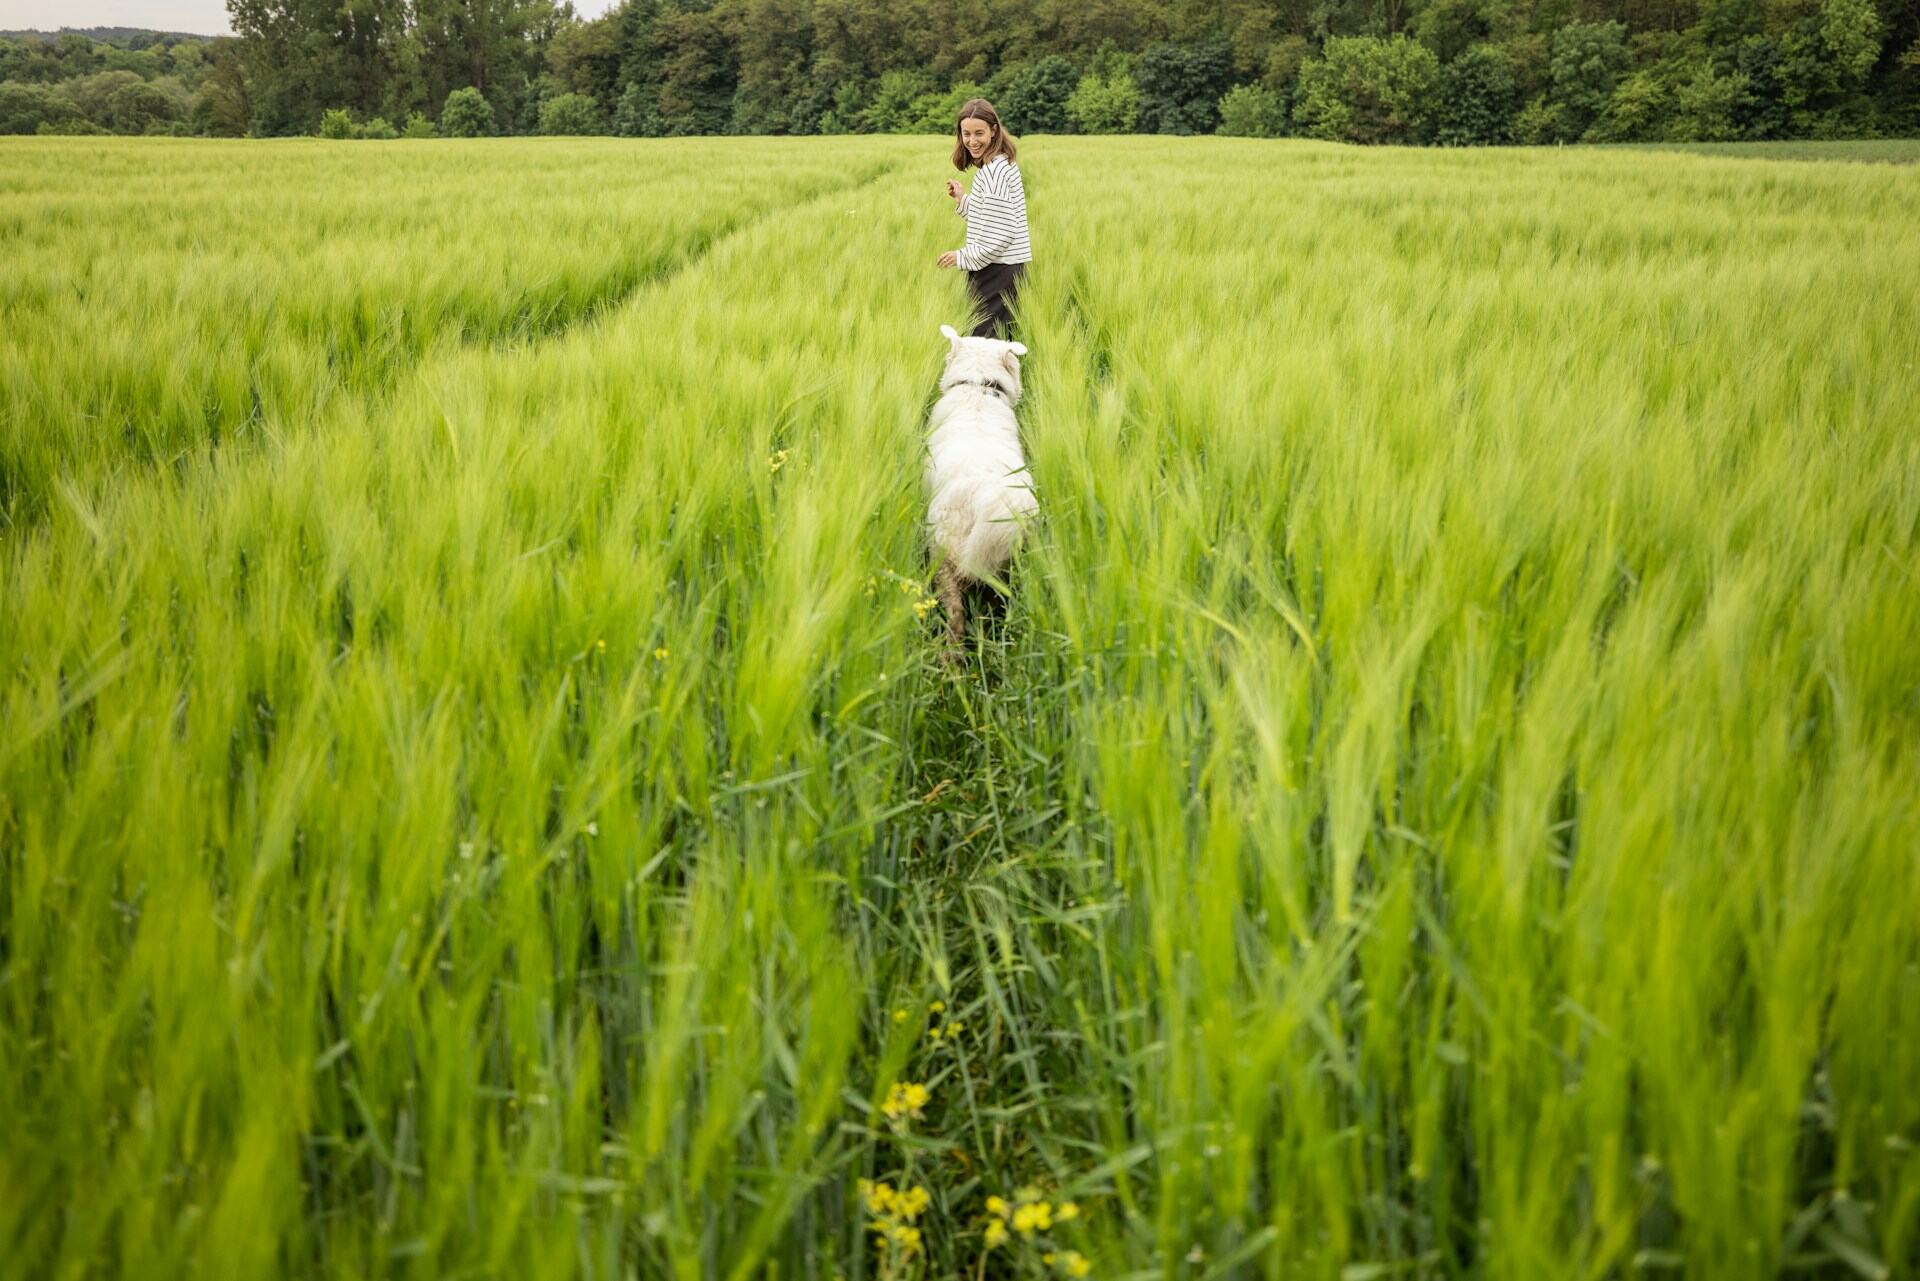 A dog running towards a woman in a green field